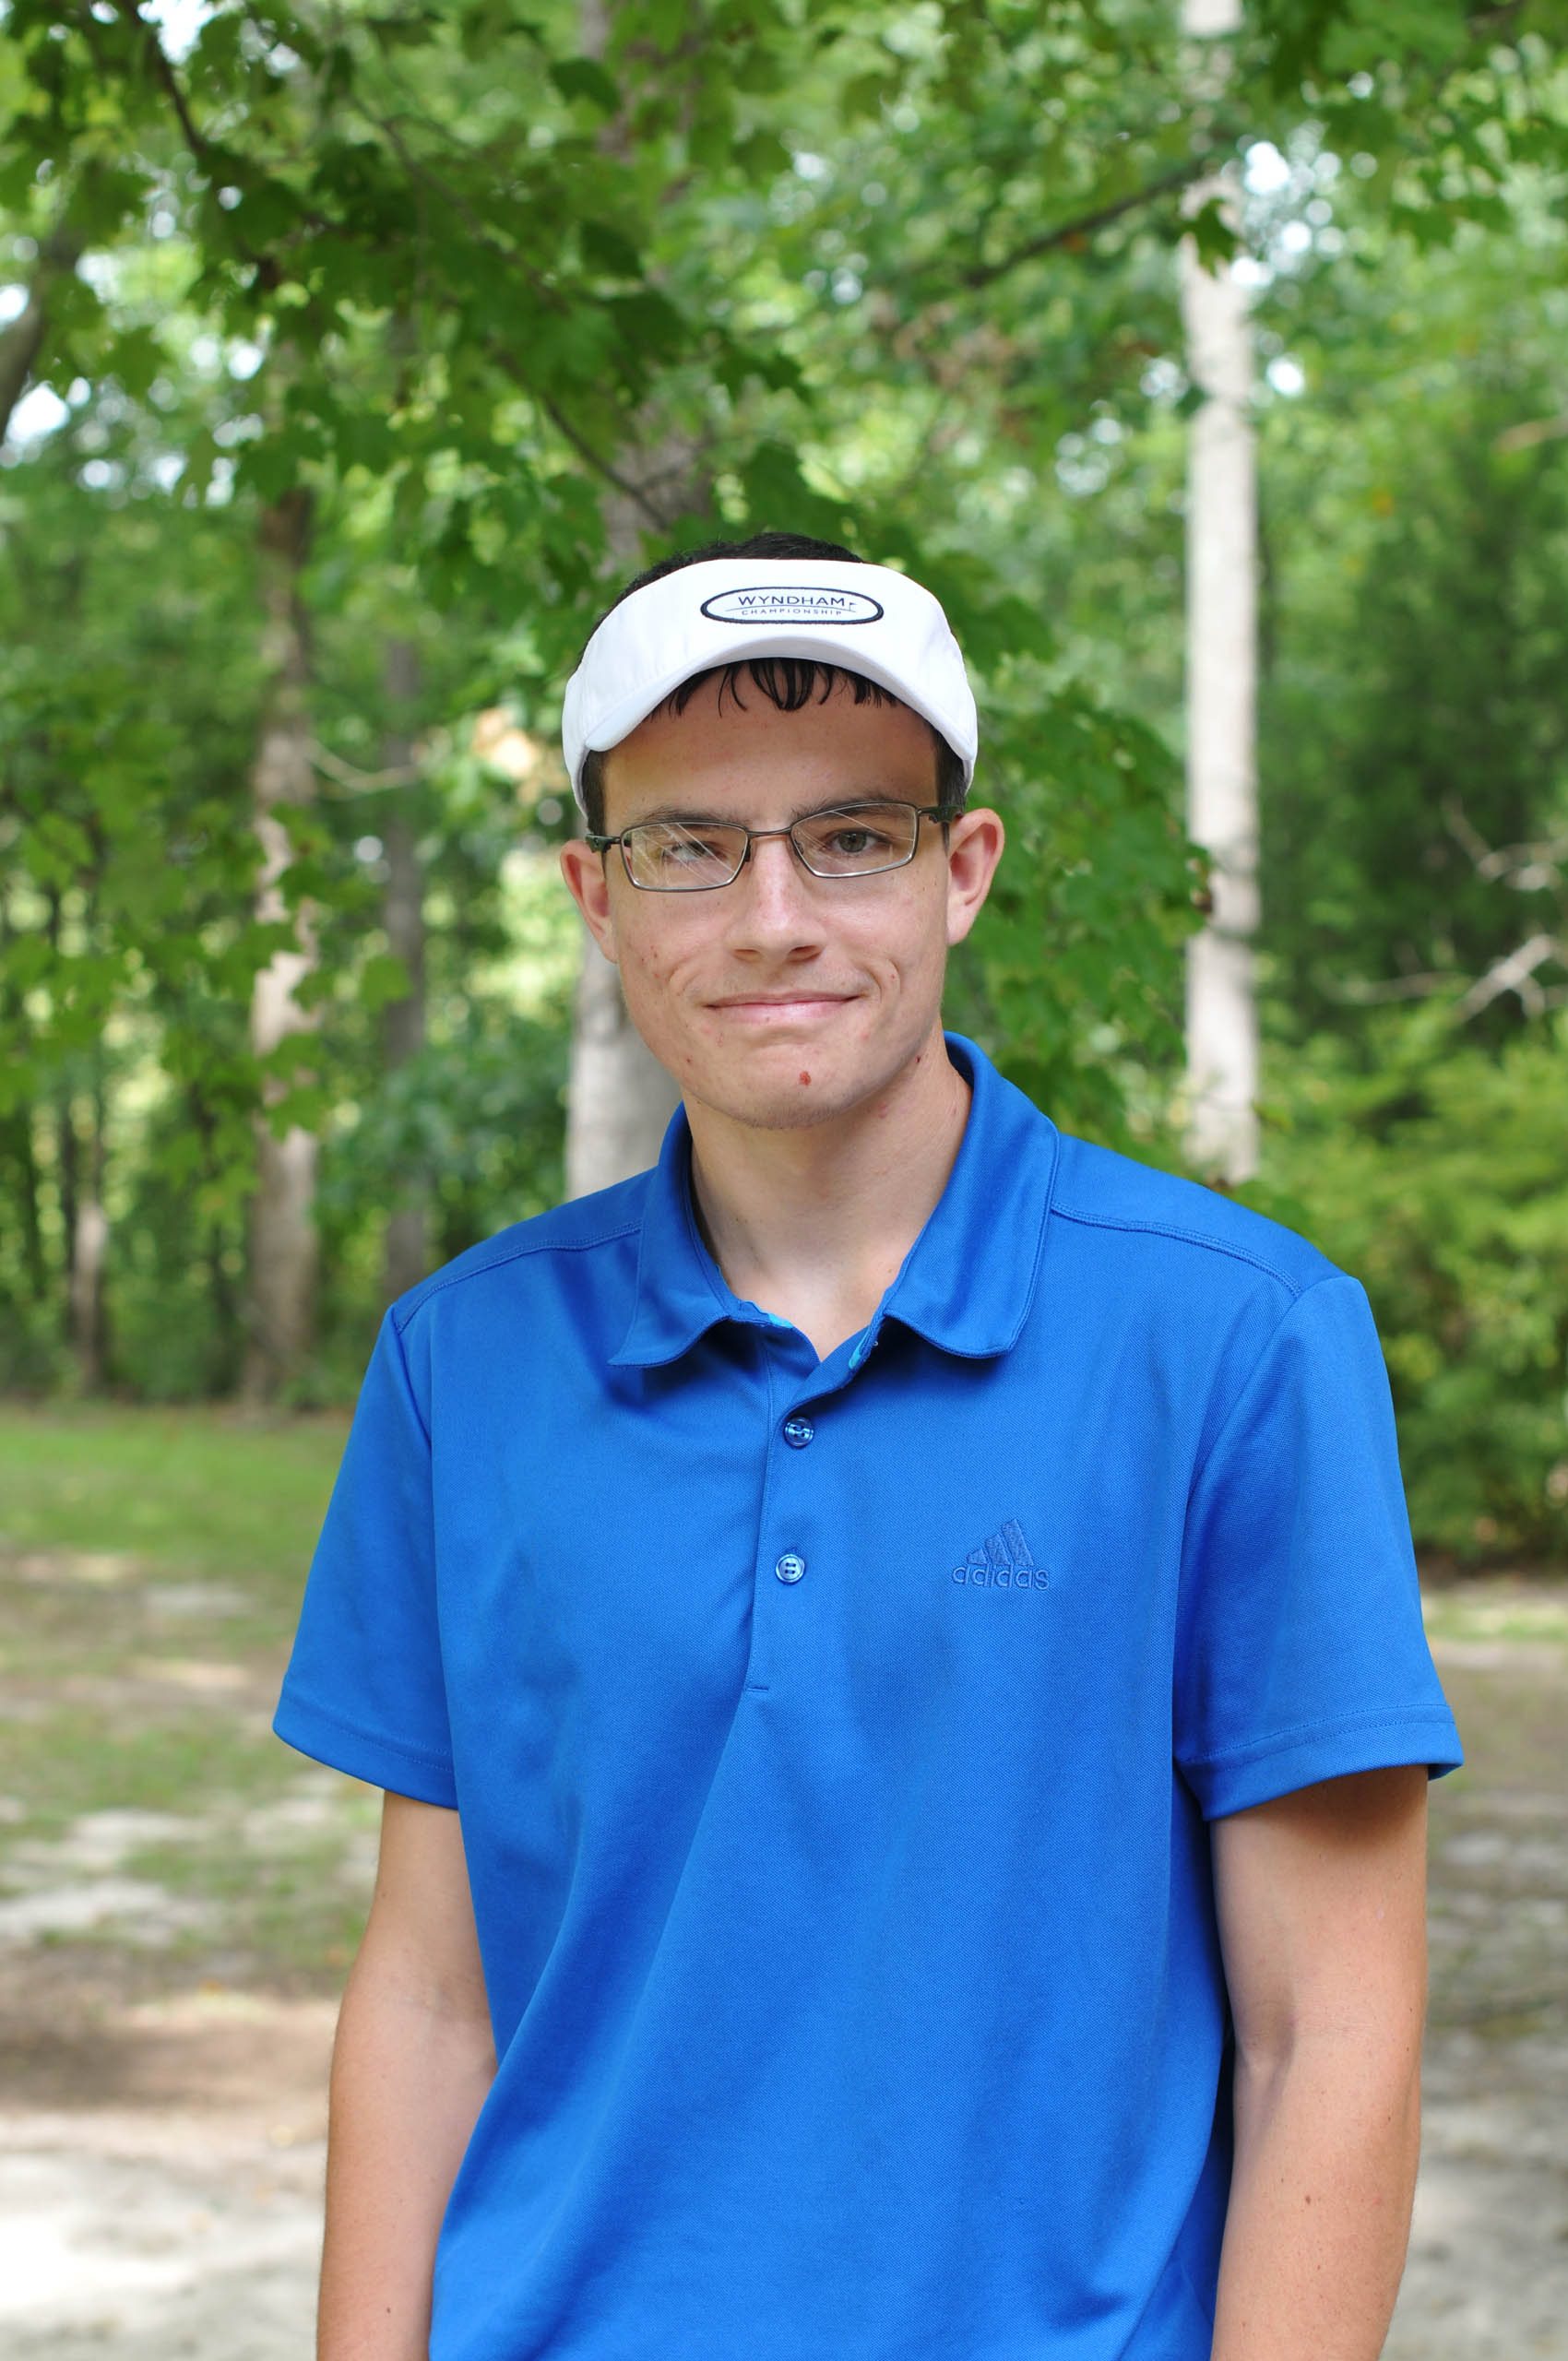 Read the full story, CCCC golfer David Smith gets hole-in-one